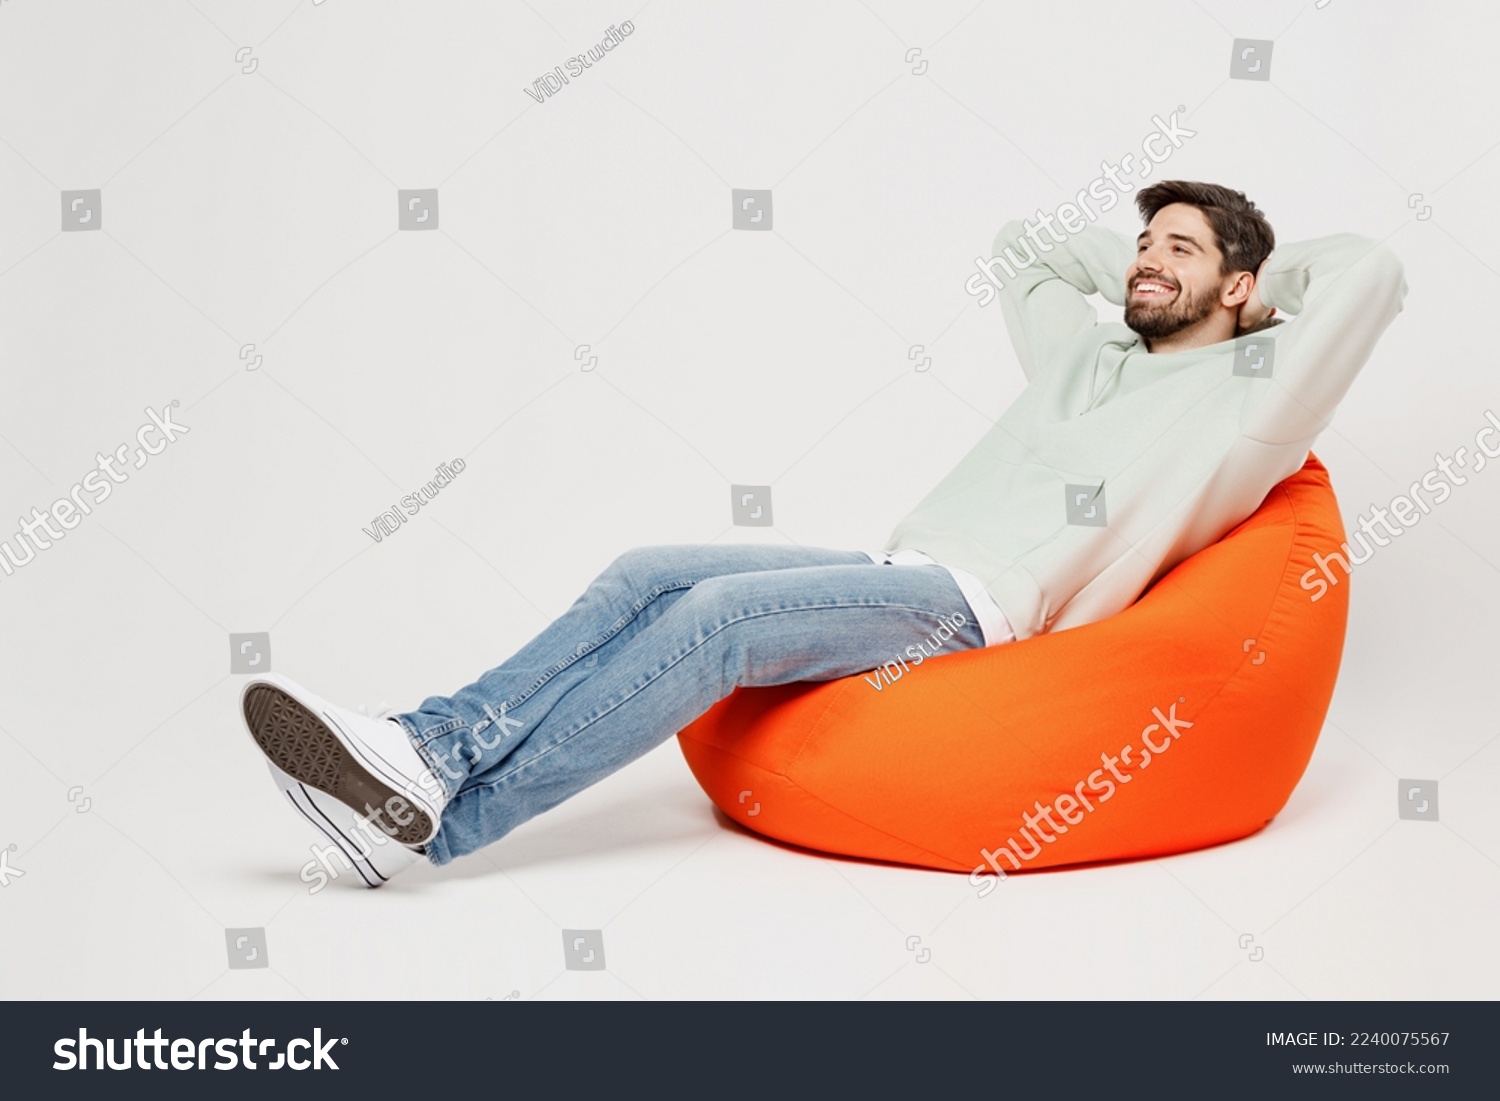 Full body young minded dreamful happy smiling man wear mint hoody sit in bag chair look camera hold hands behind neck isolated on plain solid white background studio portrait People lifestyle concept #2240075567